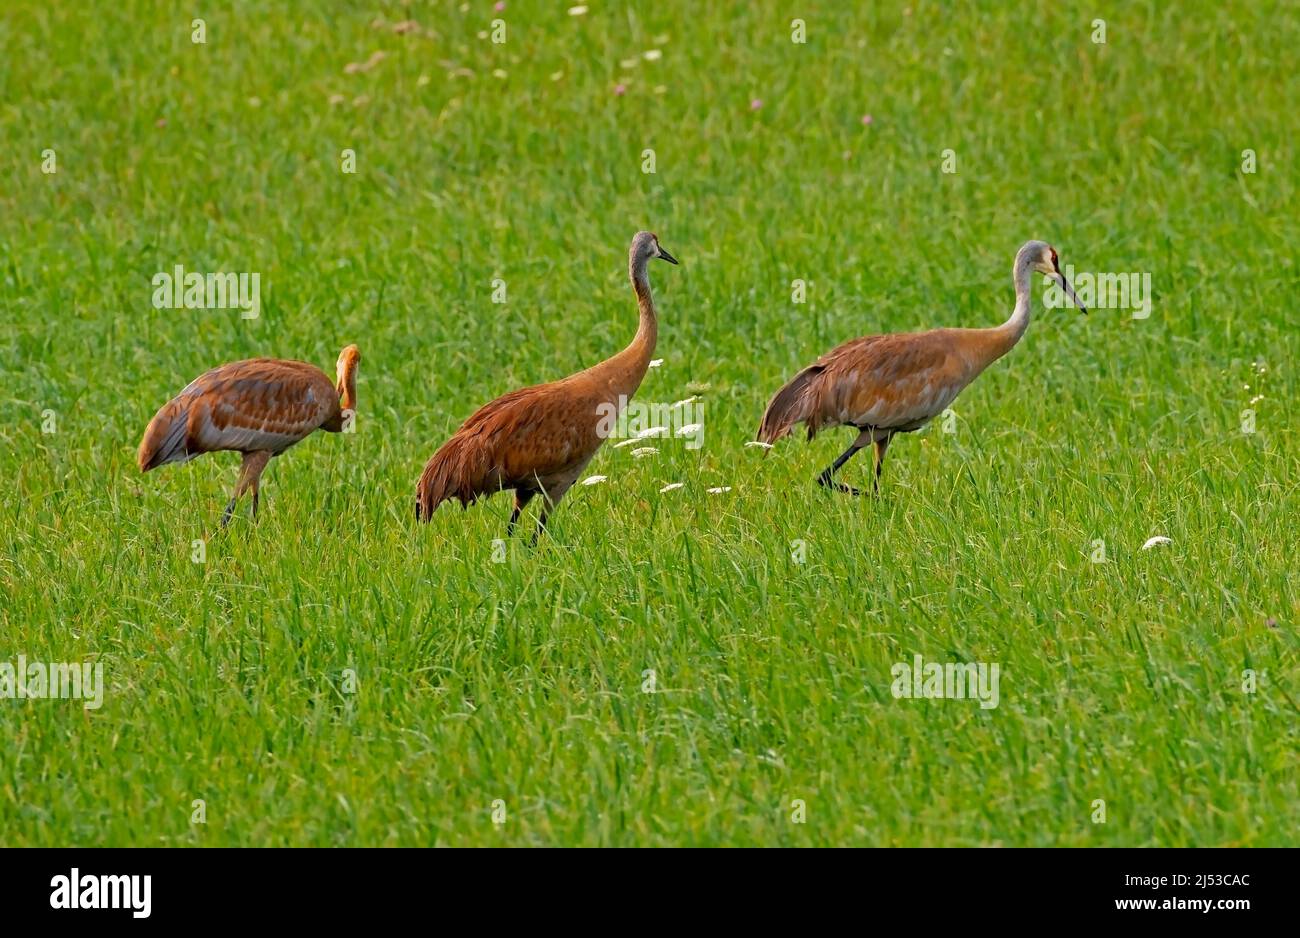 Family of three Sandhill Cranes, Grus canadensis, hunting in a hay field. Stock Photo